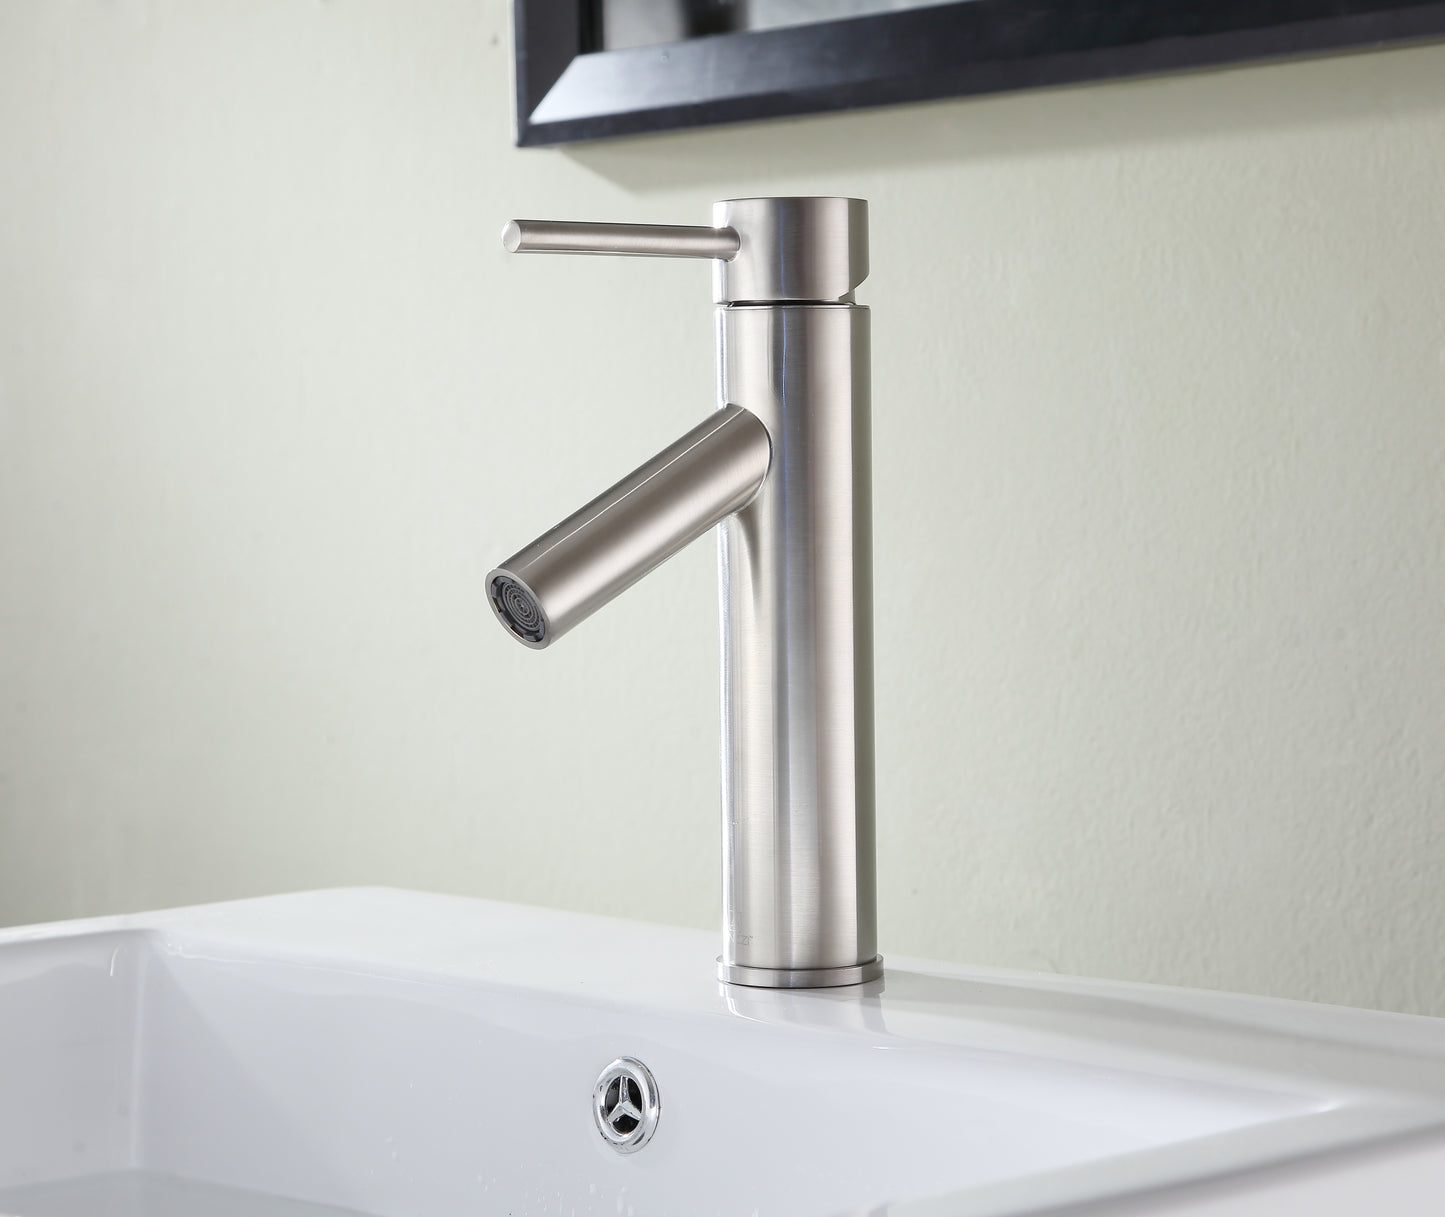 L-AZ110BN - Valle Single Hole Single Handle Bathroom Faucet in Brushed Nickel